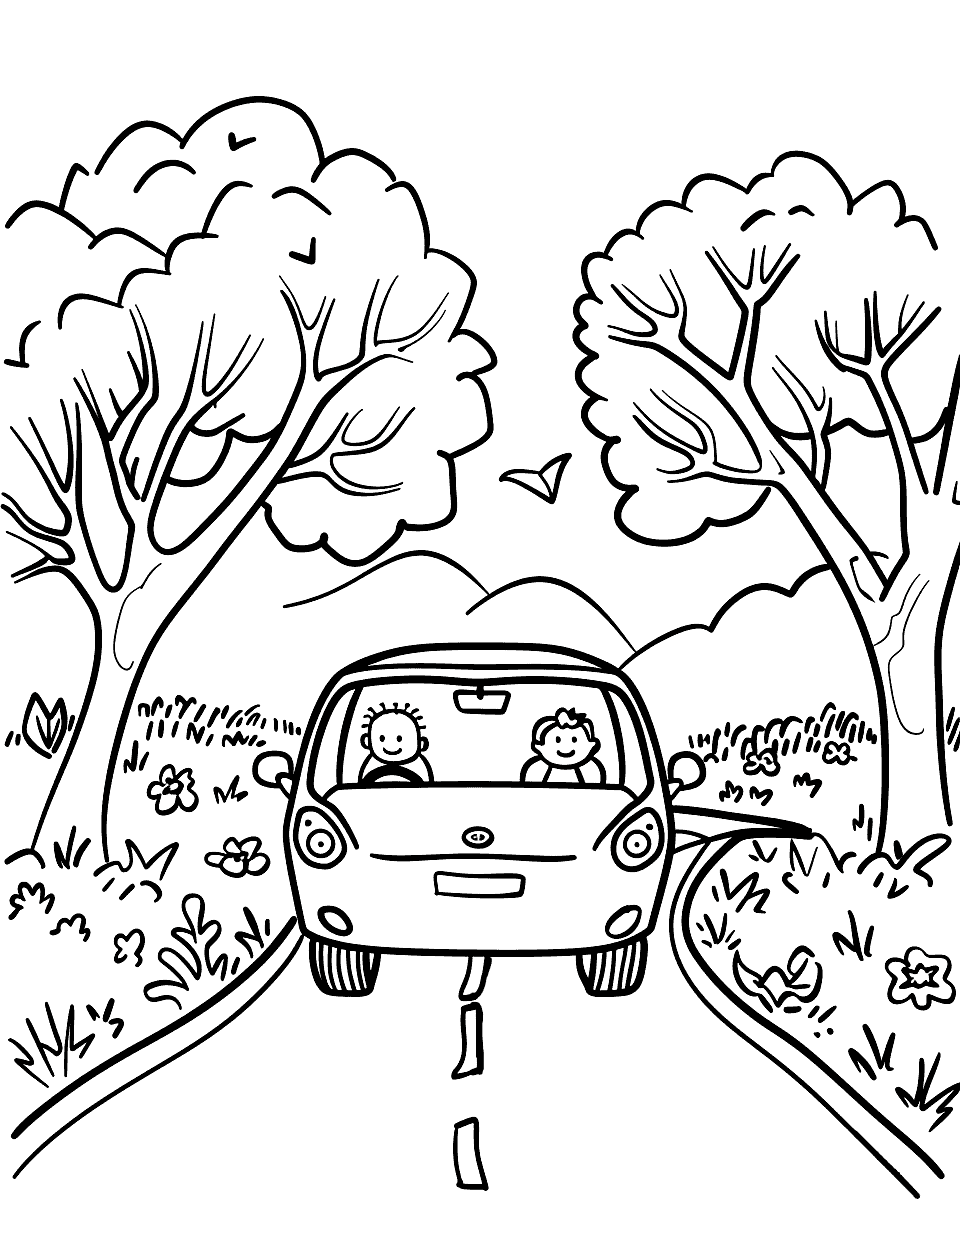 Rectangle Road Trip Shapes Coloring Page - A family driving in a rectangular car along a simple, winding road.